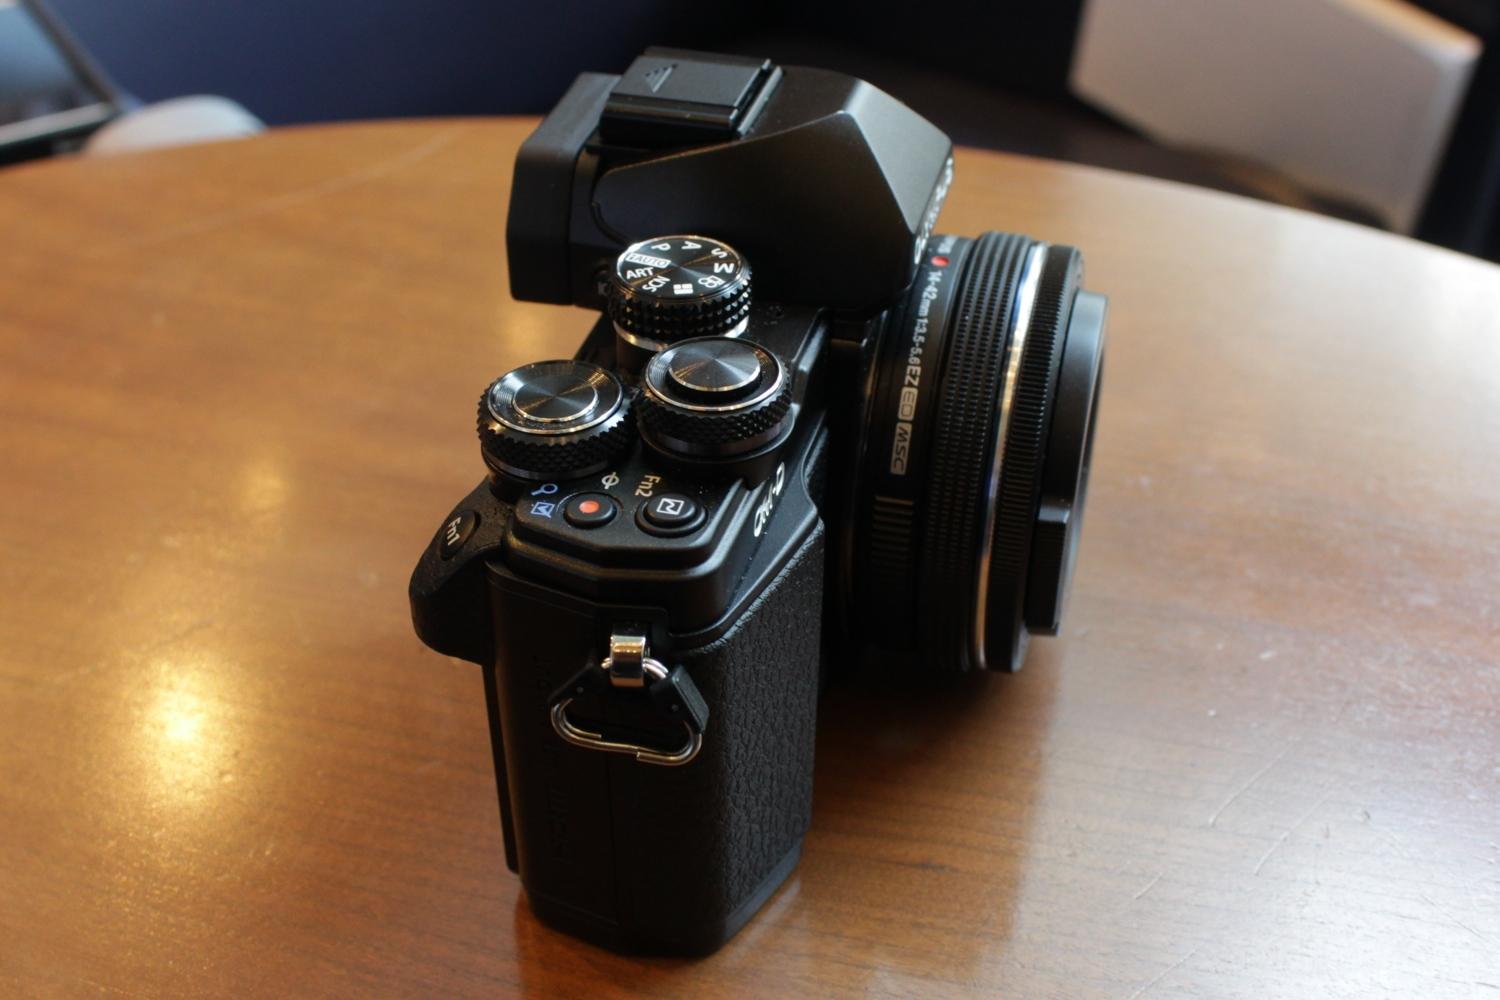 olympus gives entry level om d e m10 mirrorless camera big upgrades e10mkii 22